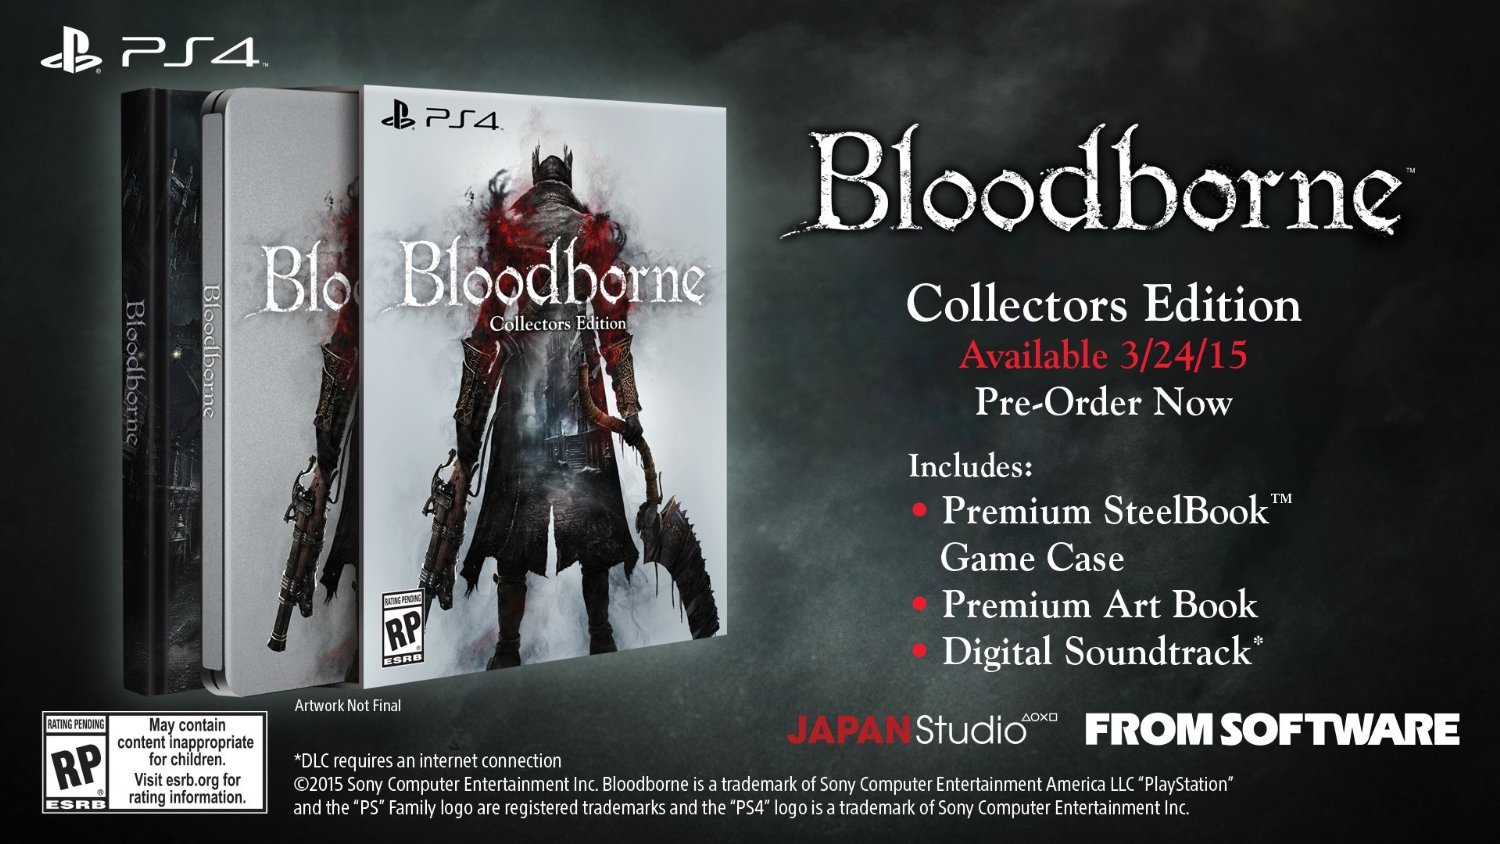 VtM - BLOODLINES 2 Collector's Edition Available for Pre-Order Now